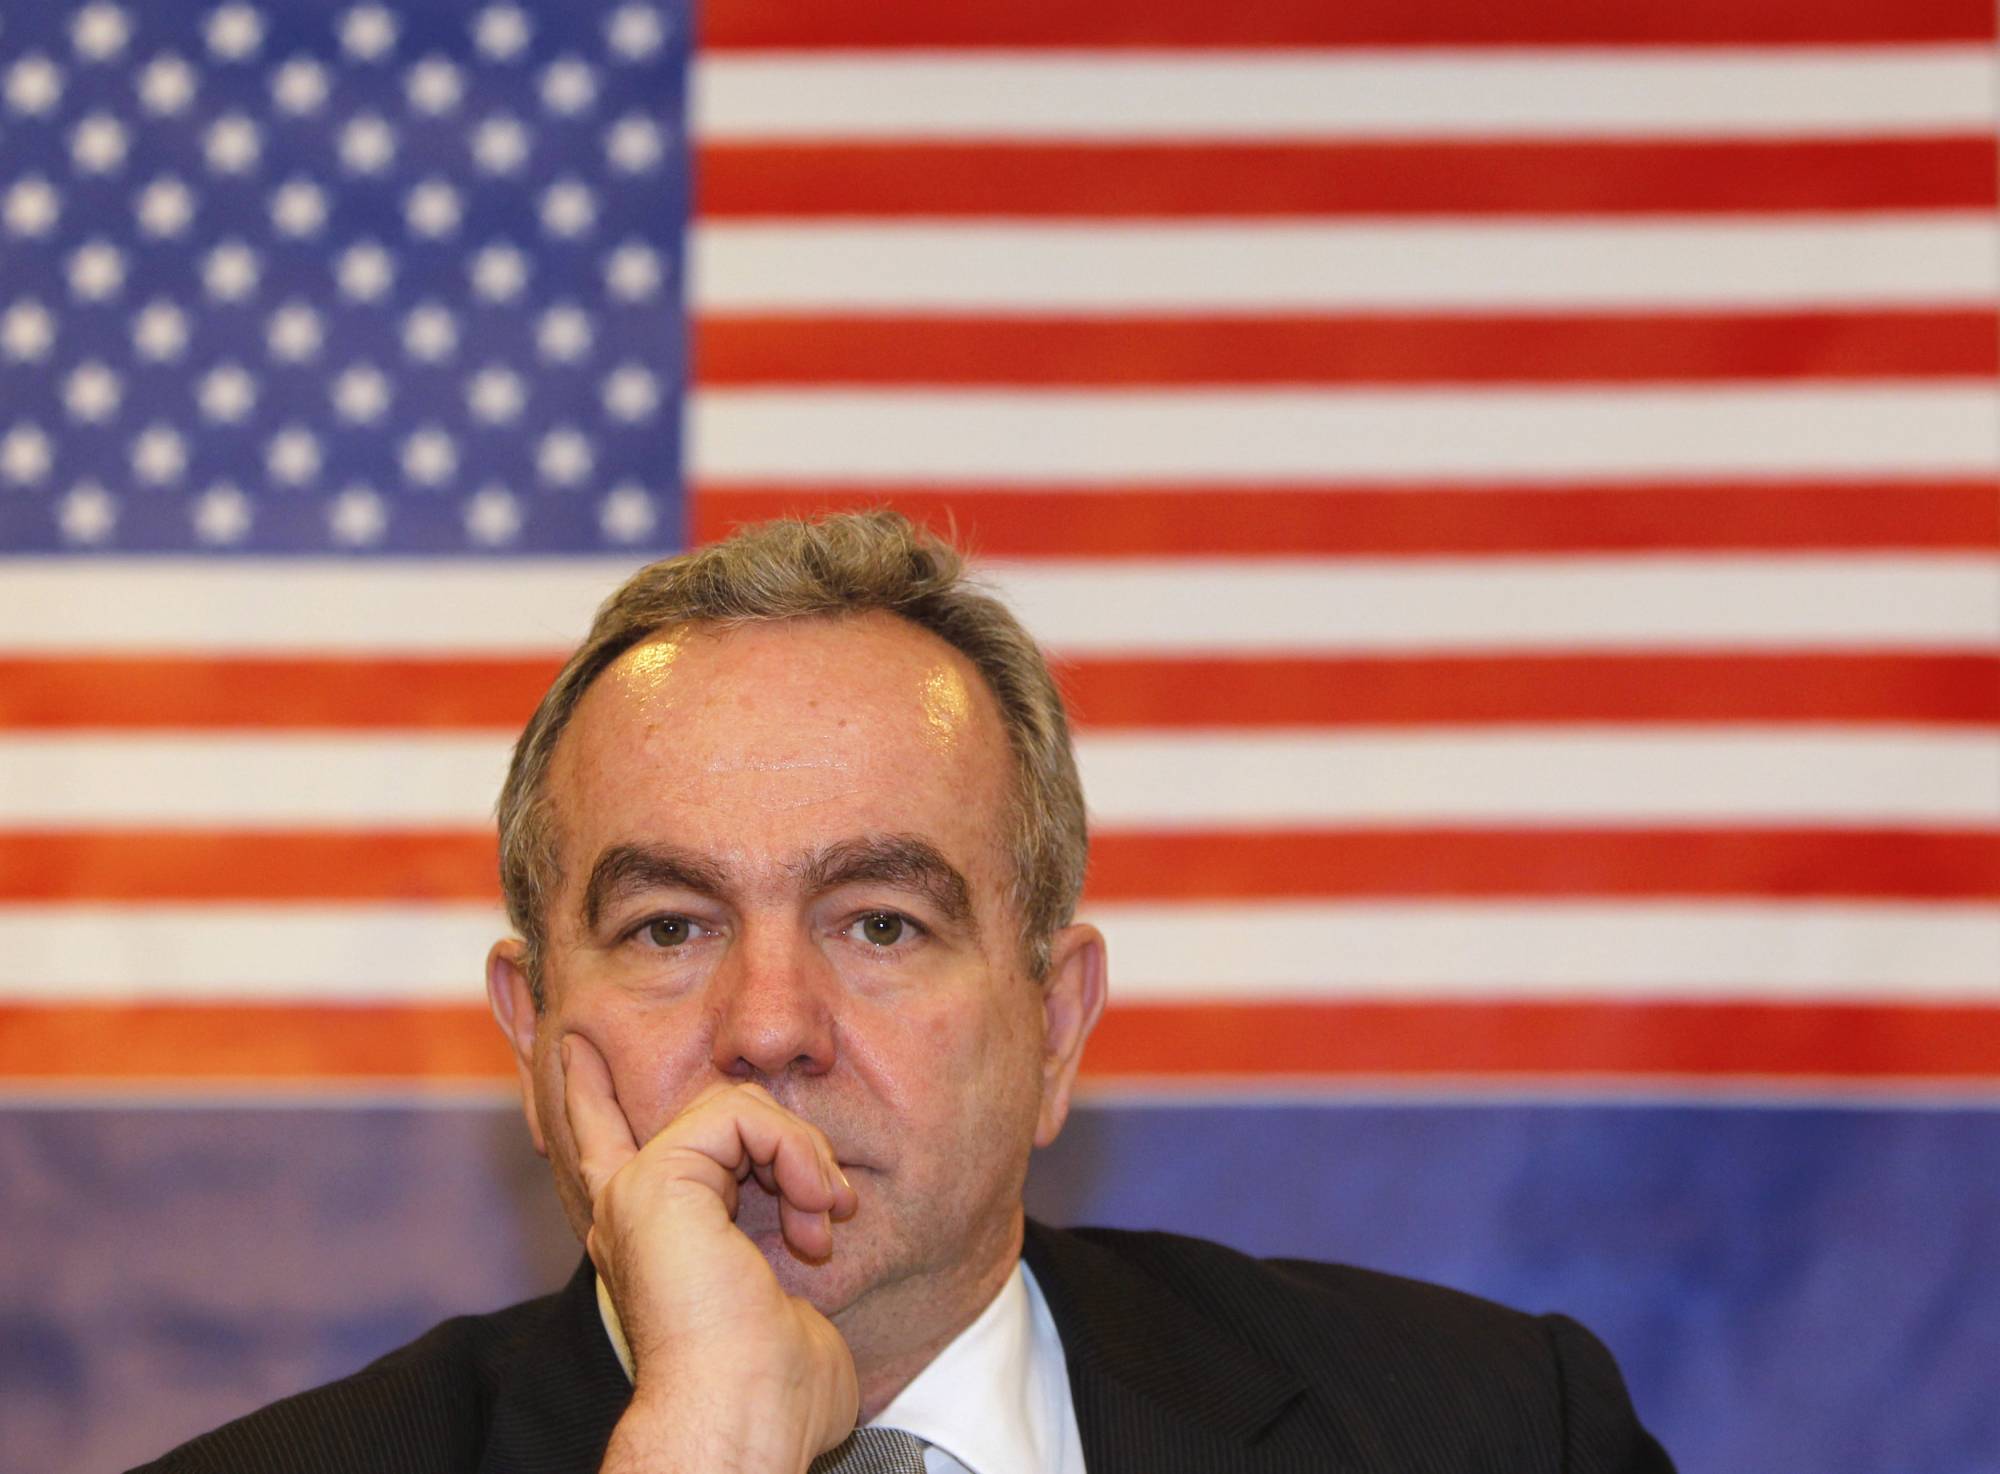 Then-U.S. Assistant Secretary of State for East Asian and Pacific Affairs Kurt Campbell listens to a question during a news conference in Manila in December 2012. U.S. President-elect Joe Biden has picked Campbell — a key architect of the U.S. pivot to Asia — as his senior policy official for the region. | REUTERS